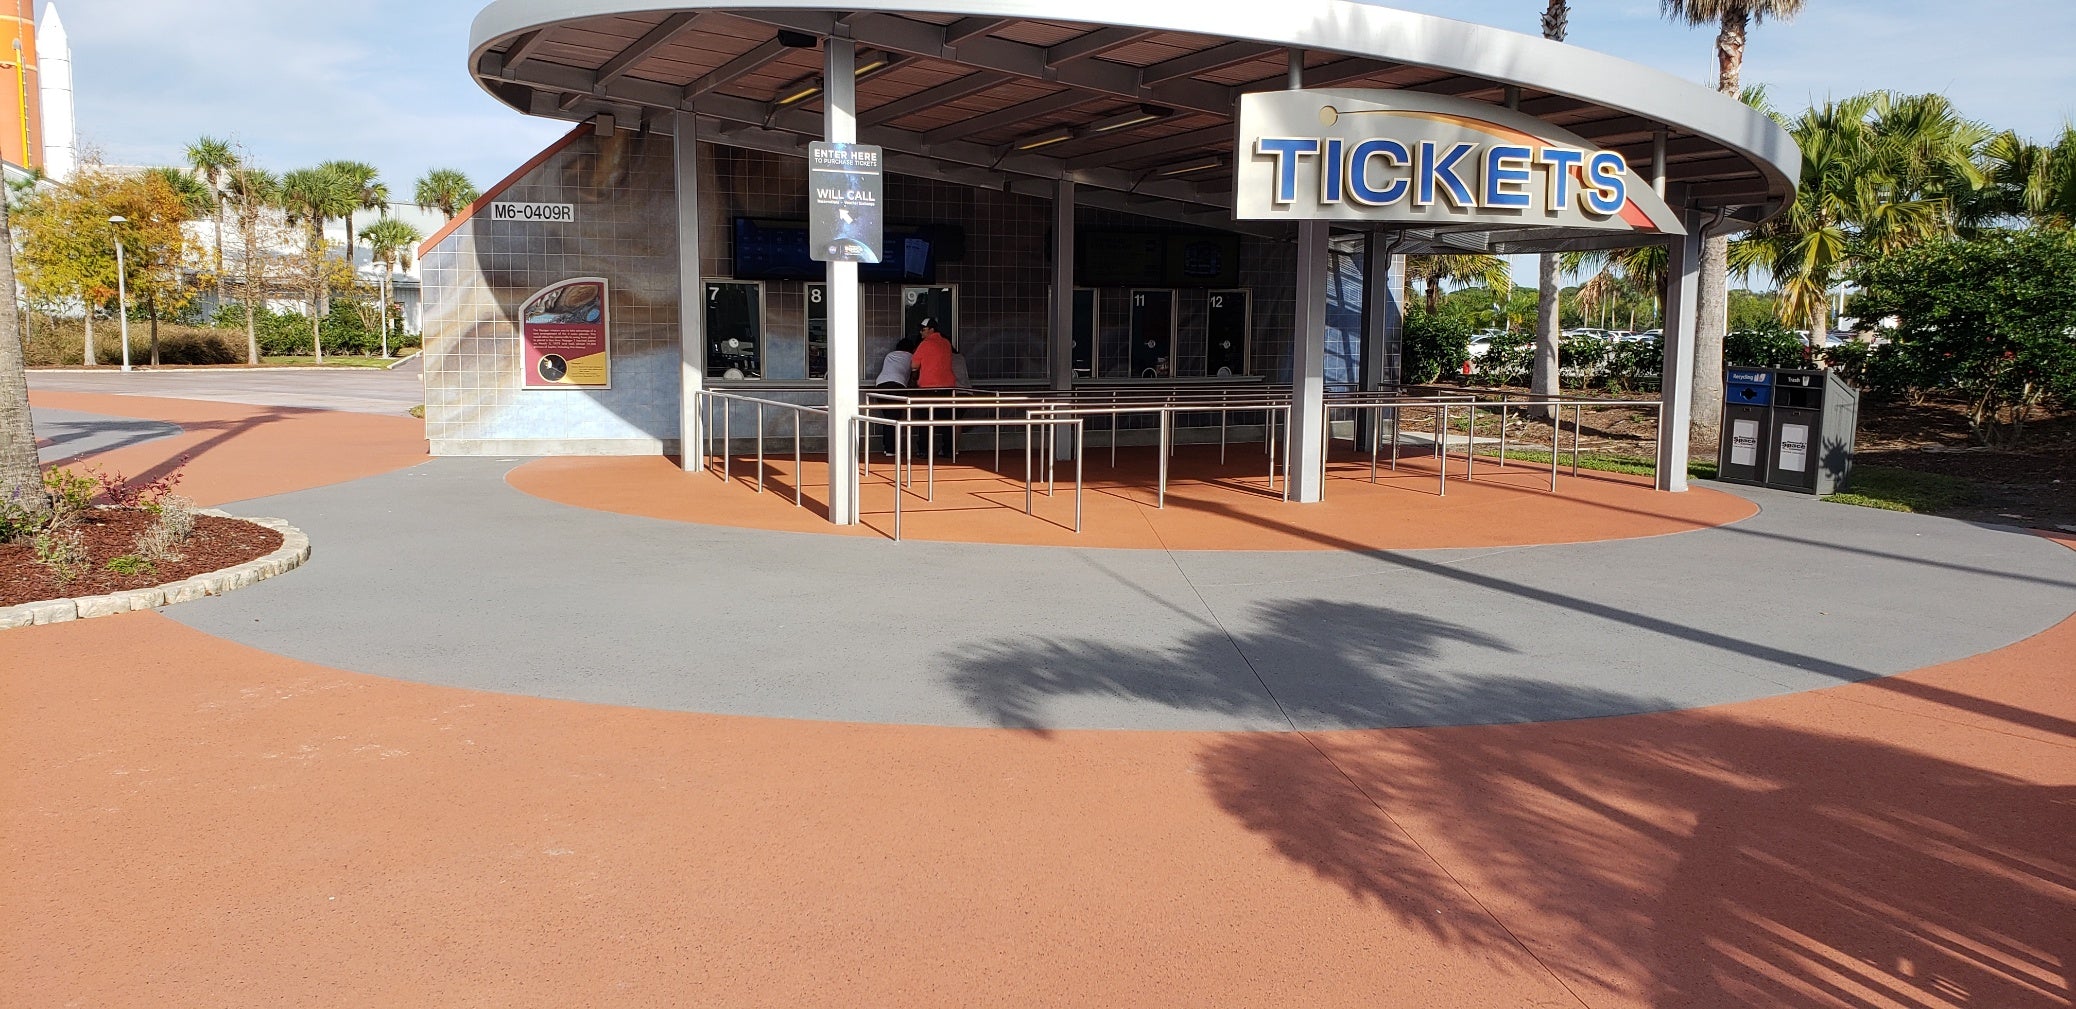 Ticket booth at an attraction